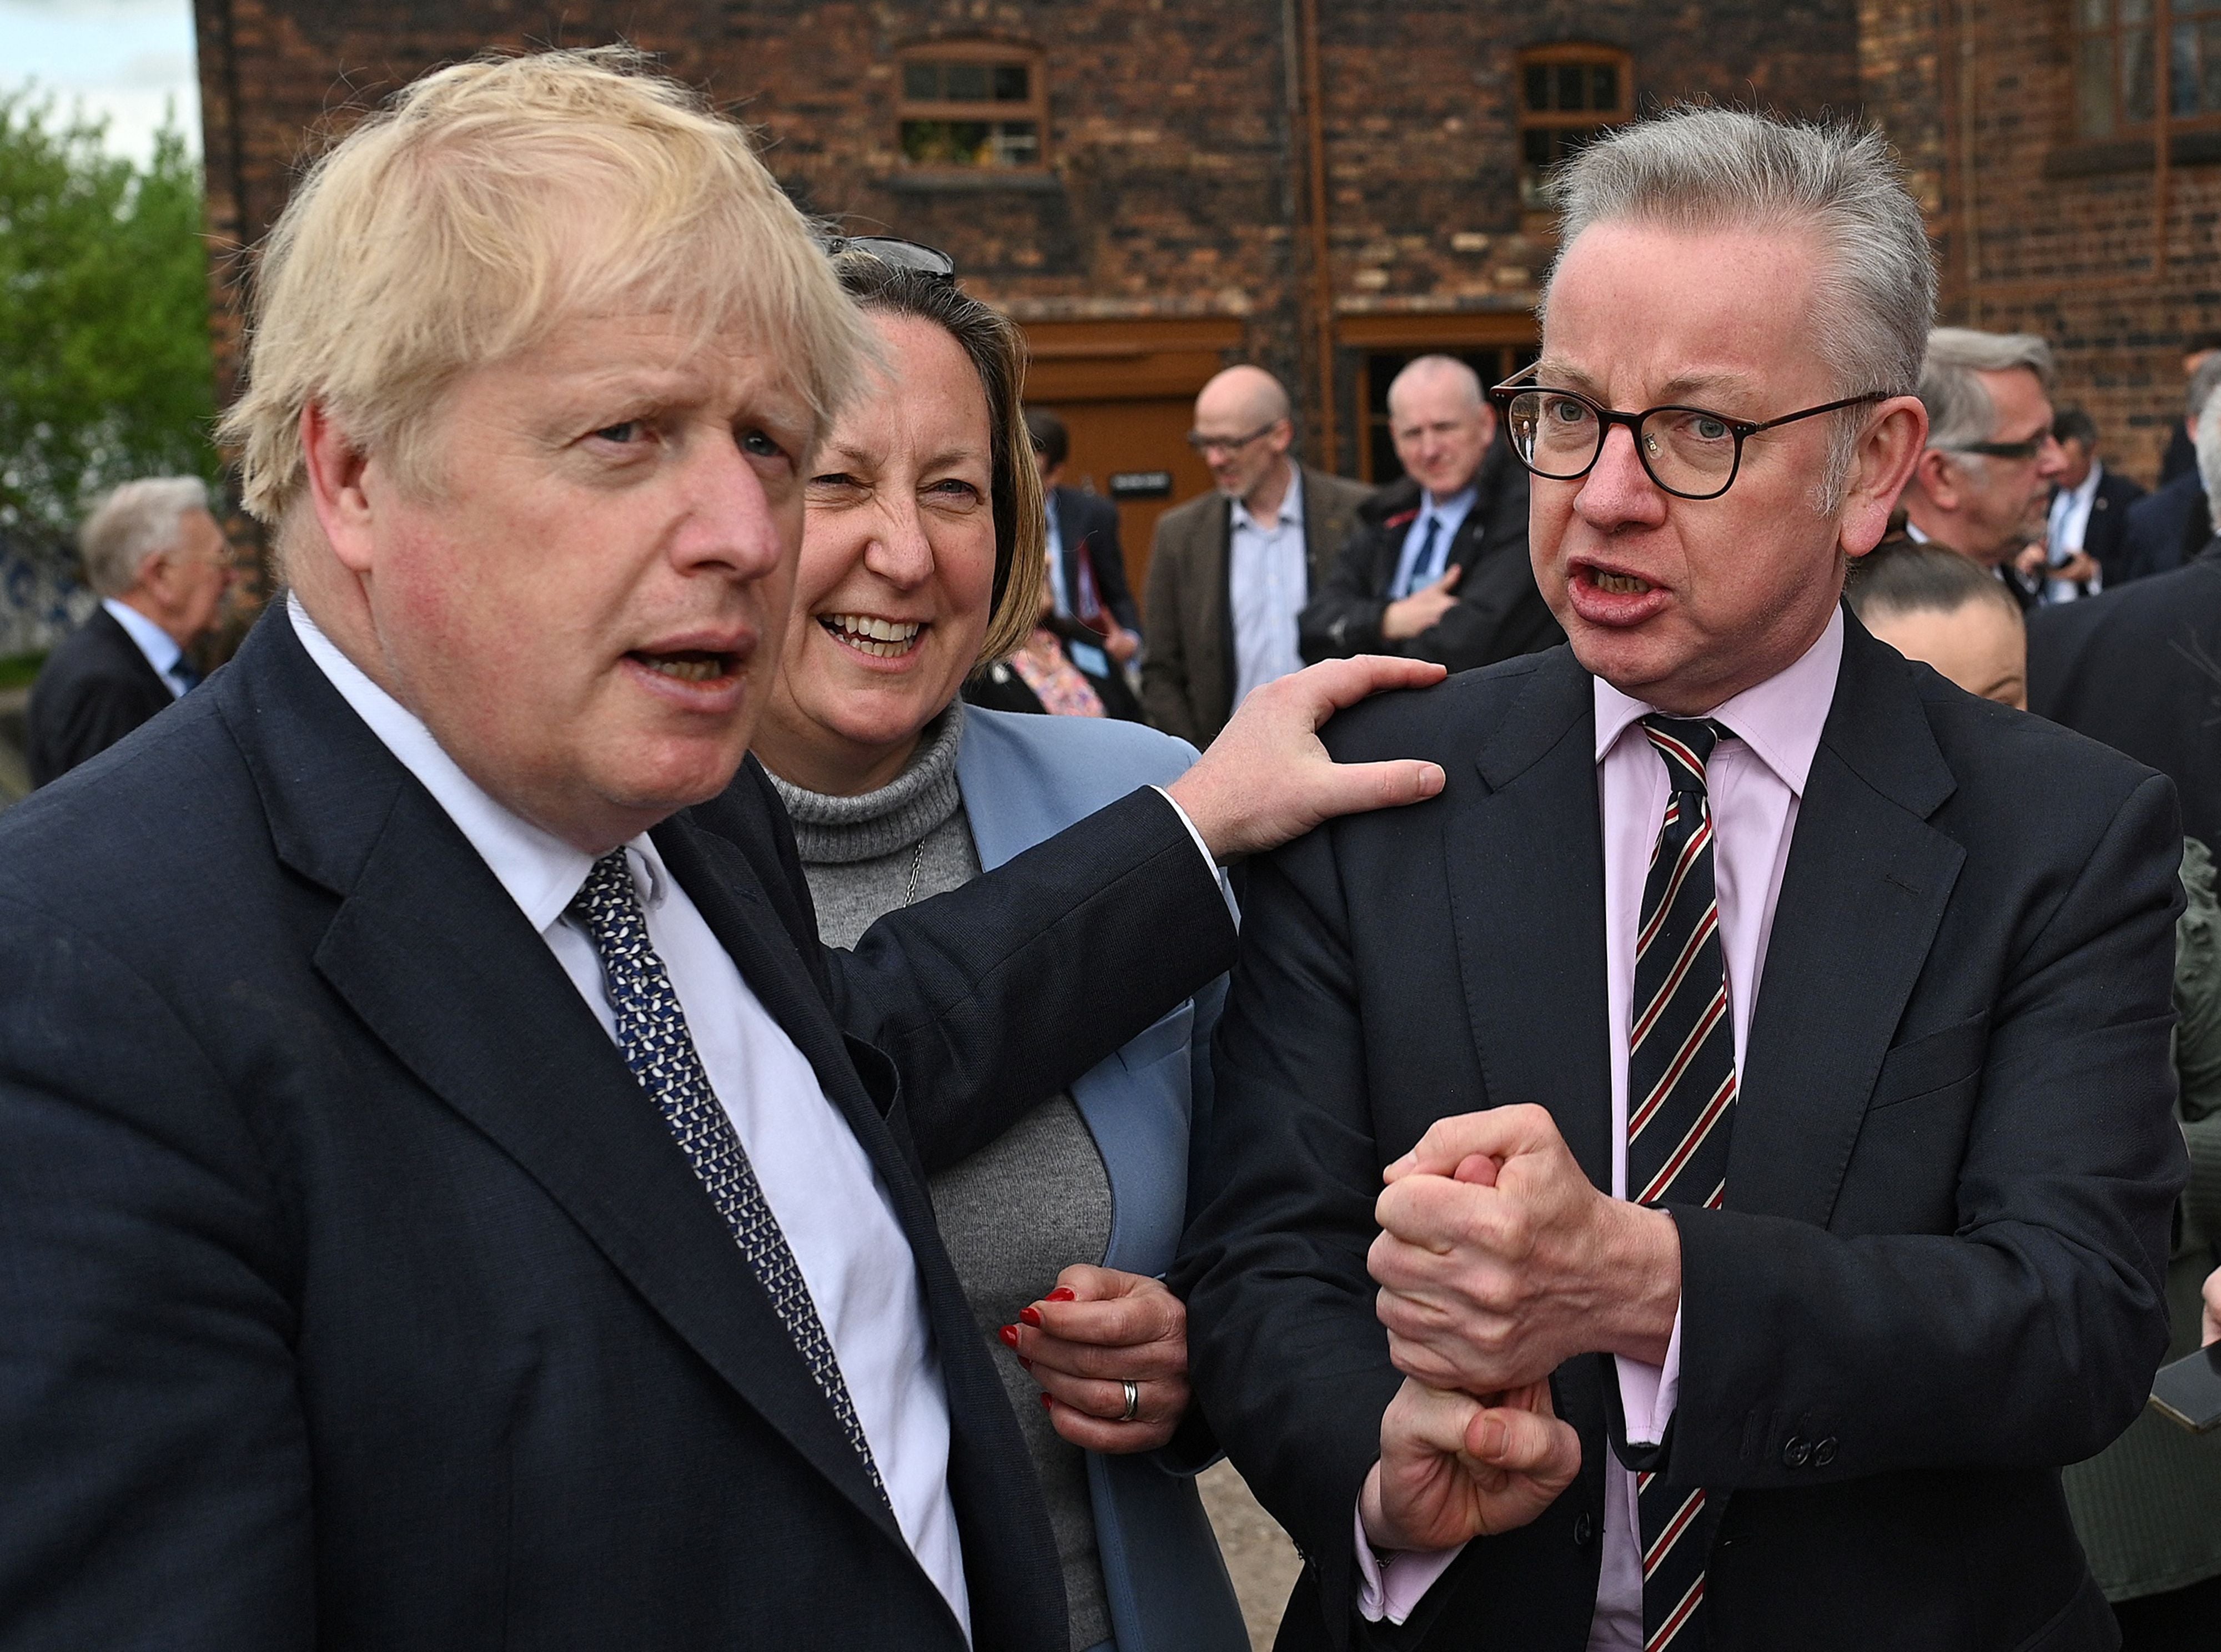 Gove defended Boris Johnson, but suggested he was slow to make key decisions